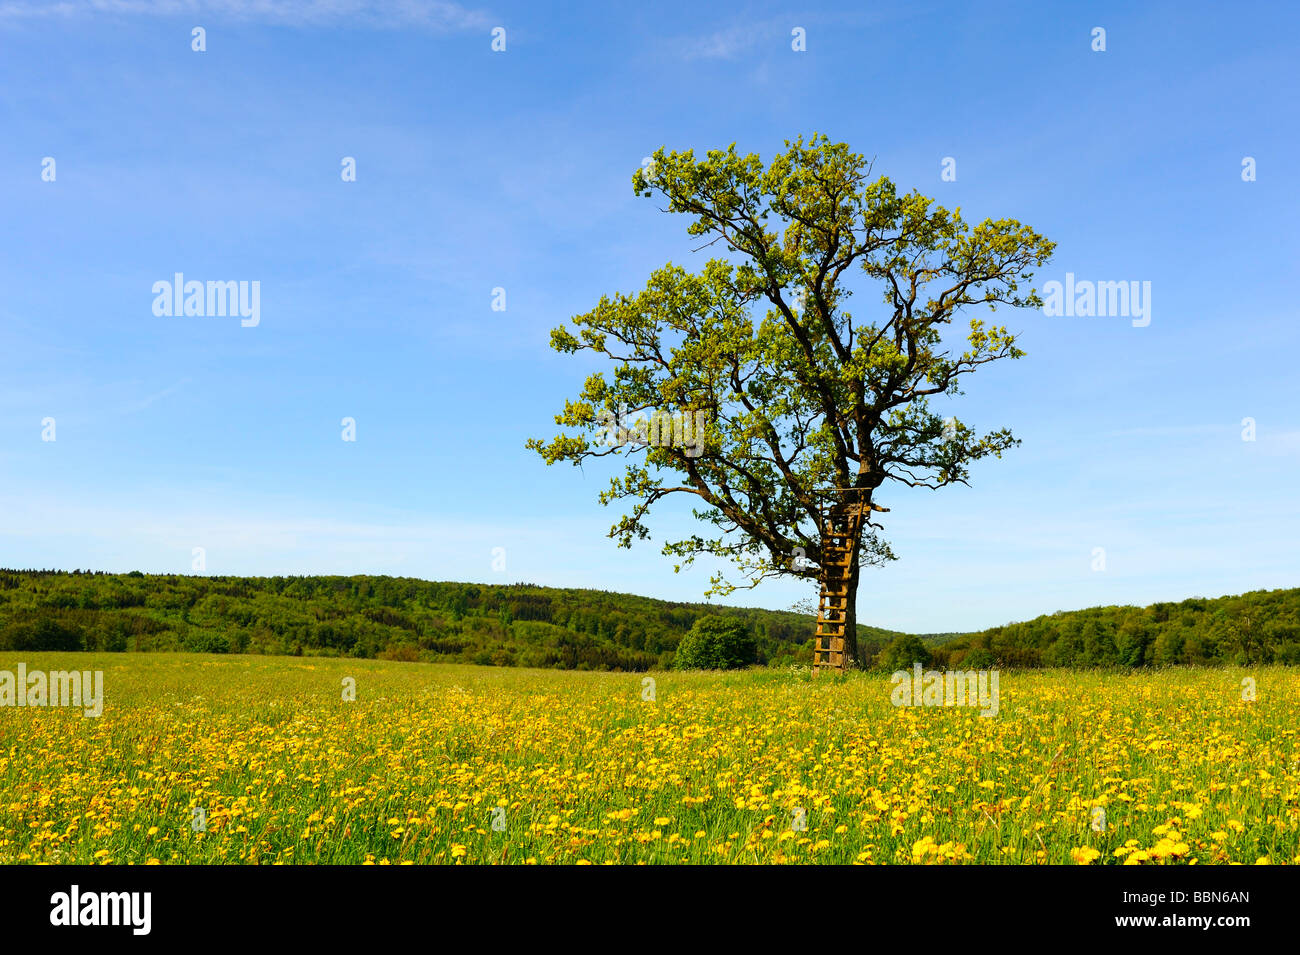 Pedunculate oak (Quercus robur) with a raised hide in spring, Swabian Mountains, Baden-Wuerttemberg, Germany, Europe Stock Photo